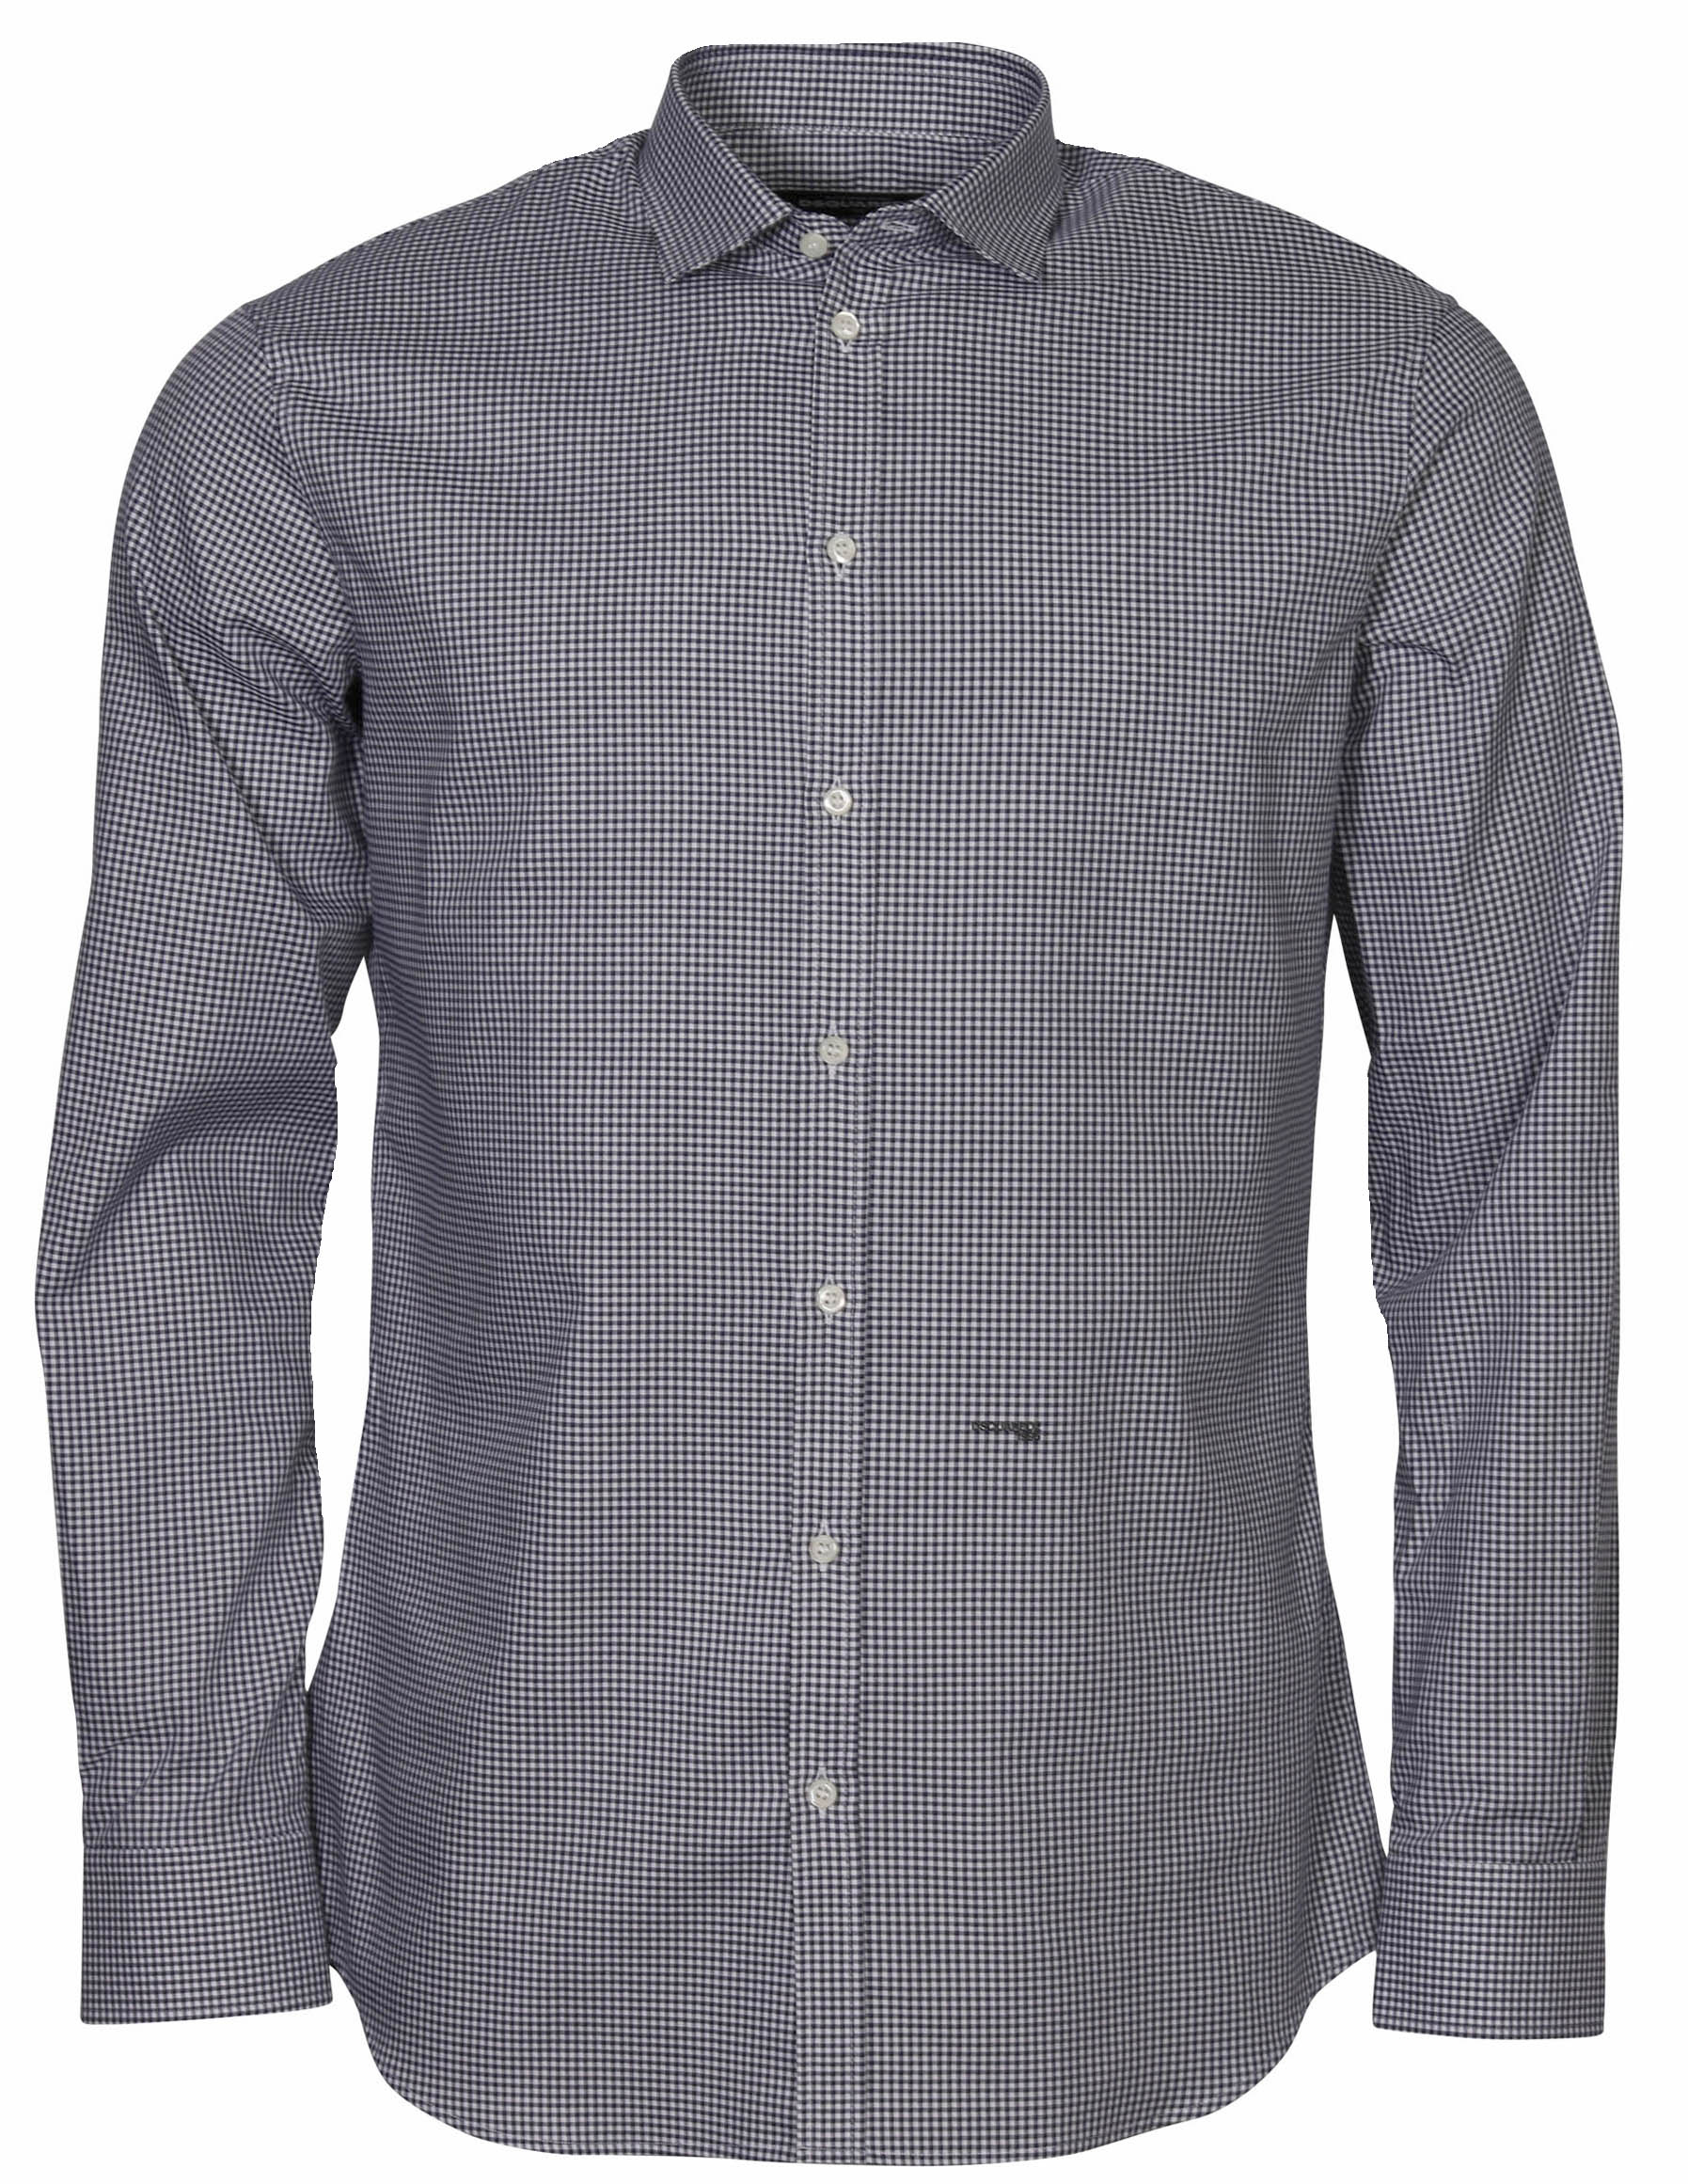 Dsquared Classic Tailored Check Shirt Navy/White